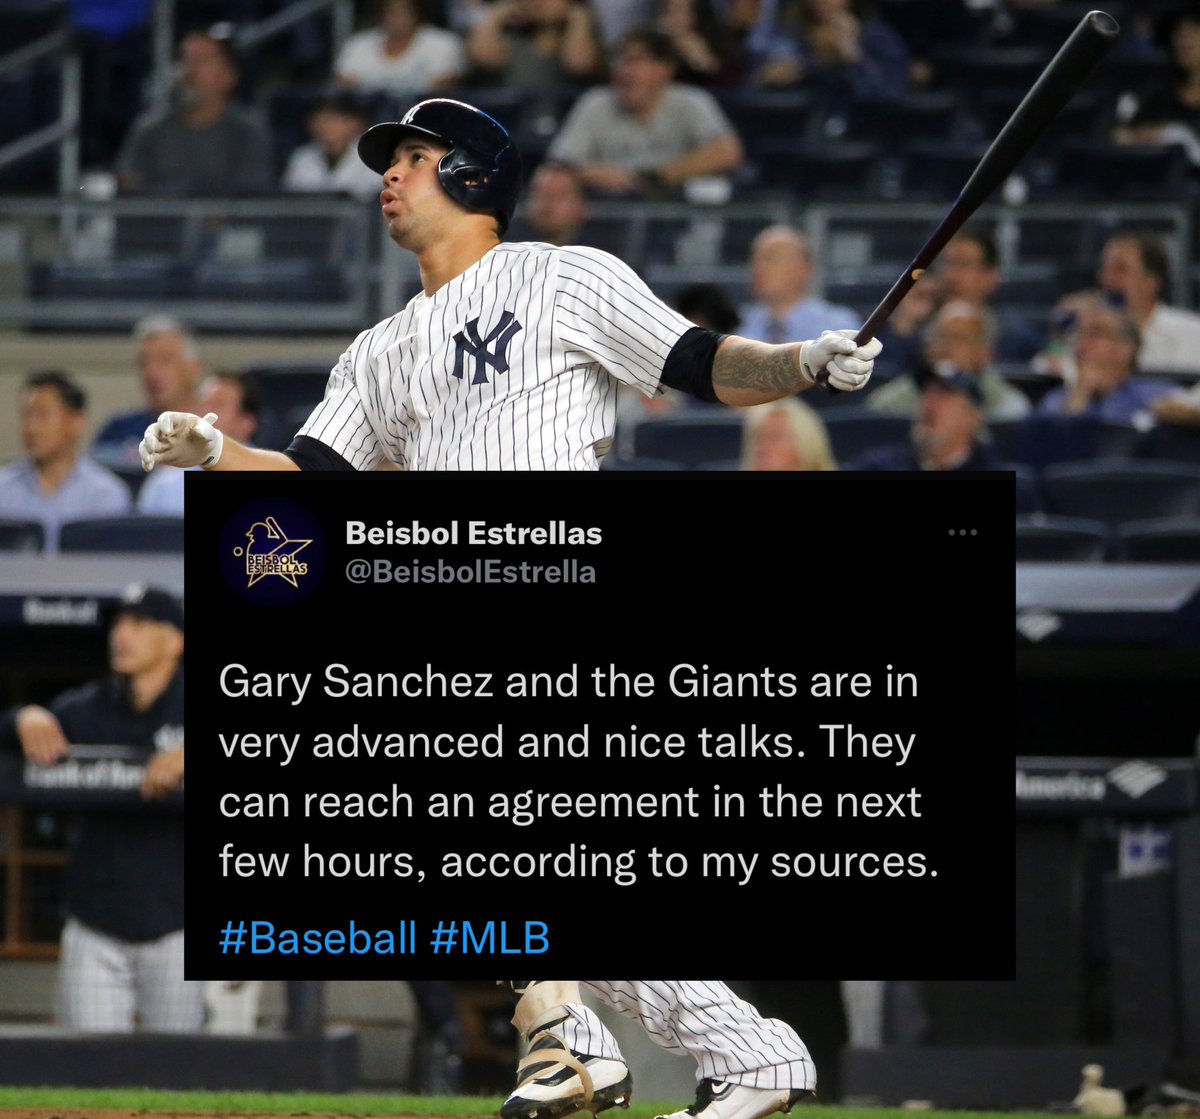 Giants are in “deep discussions” with Gary Sanchez about a deal per Beisnol Estrellas #mlbrumors #garysanchez #SFGiants